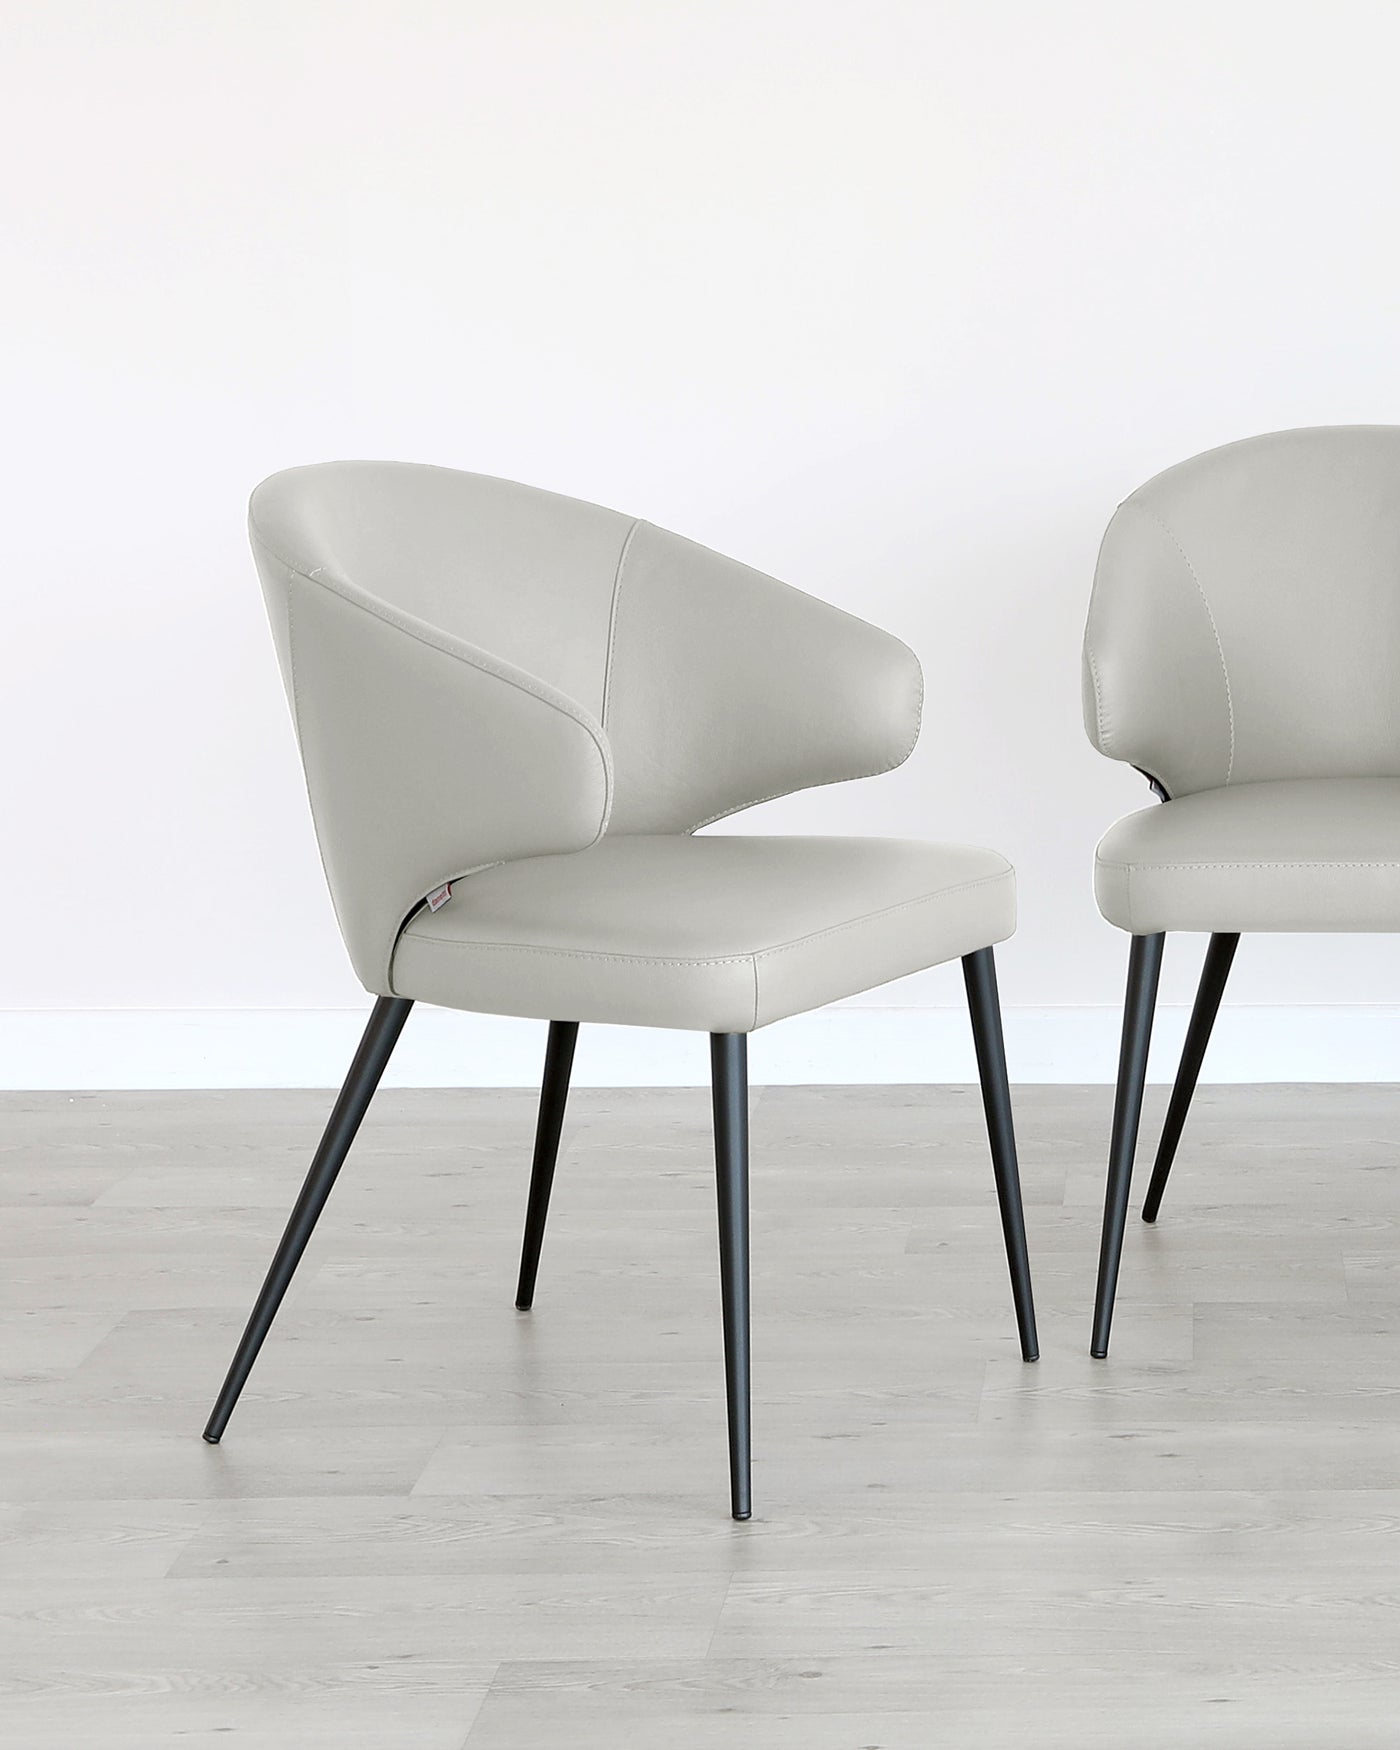 Two modern light grey upholstered dining chairs with curved backrests and angled black metal legs on a light wooden floor against a white backdrop.